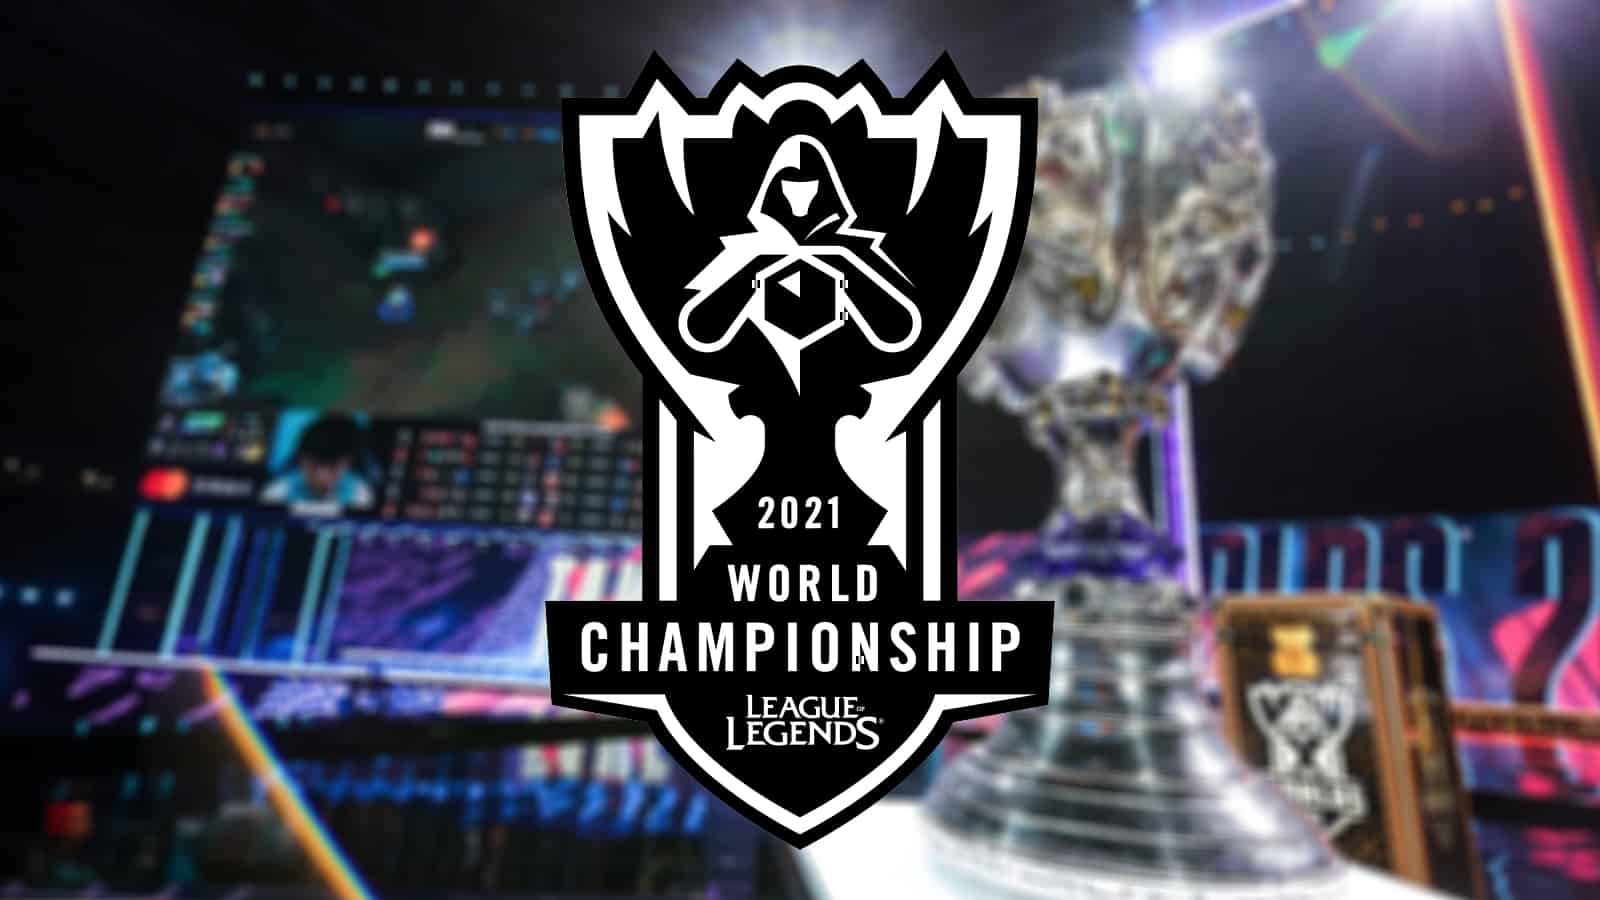 Riot Games confirms Iceland as League of Legends Worlds 2021 host